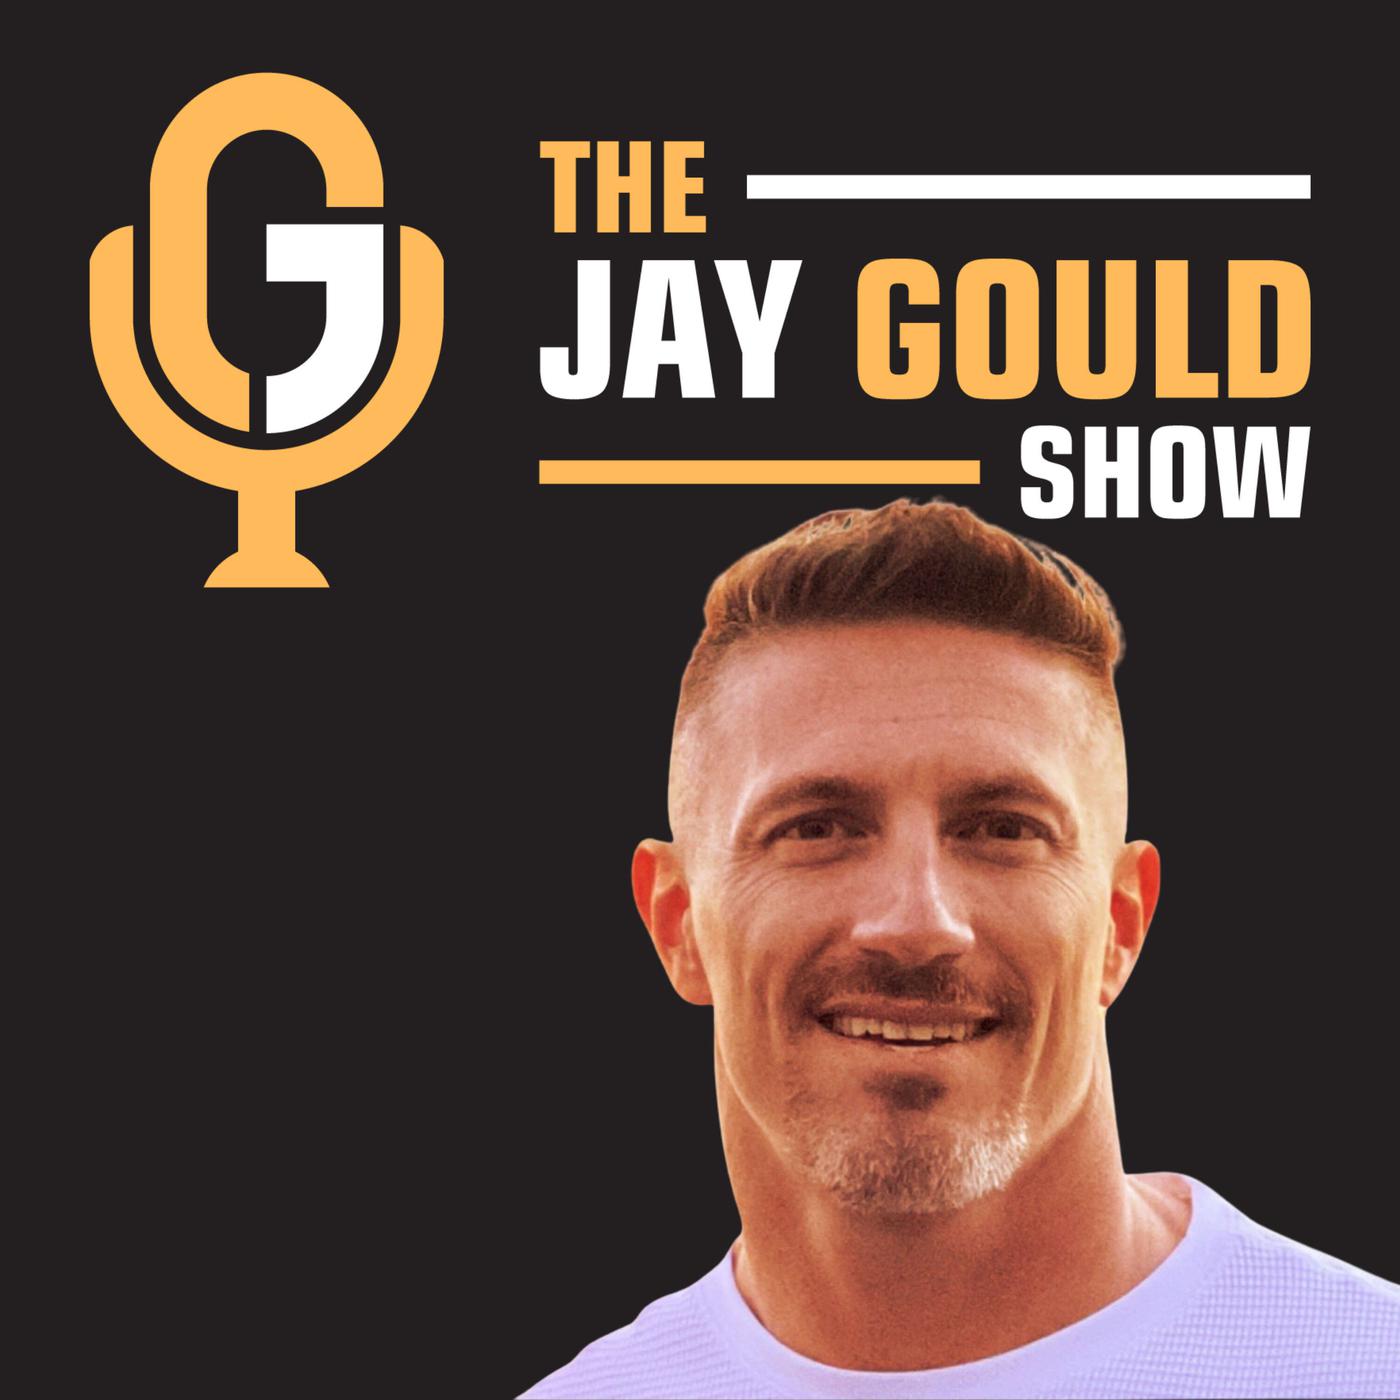 INTERVIEW | If You Have Faith That Everything Will Come in the Right Way at the Perfect Time, Then What Could Possibly Happen That Isn’t For You? on The Jay Gould Show